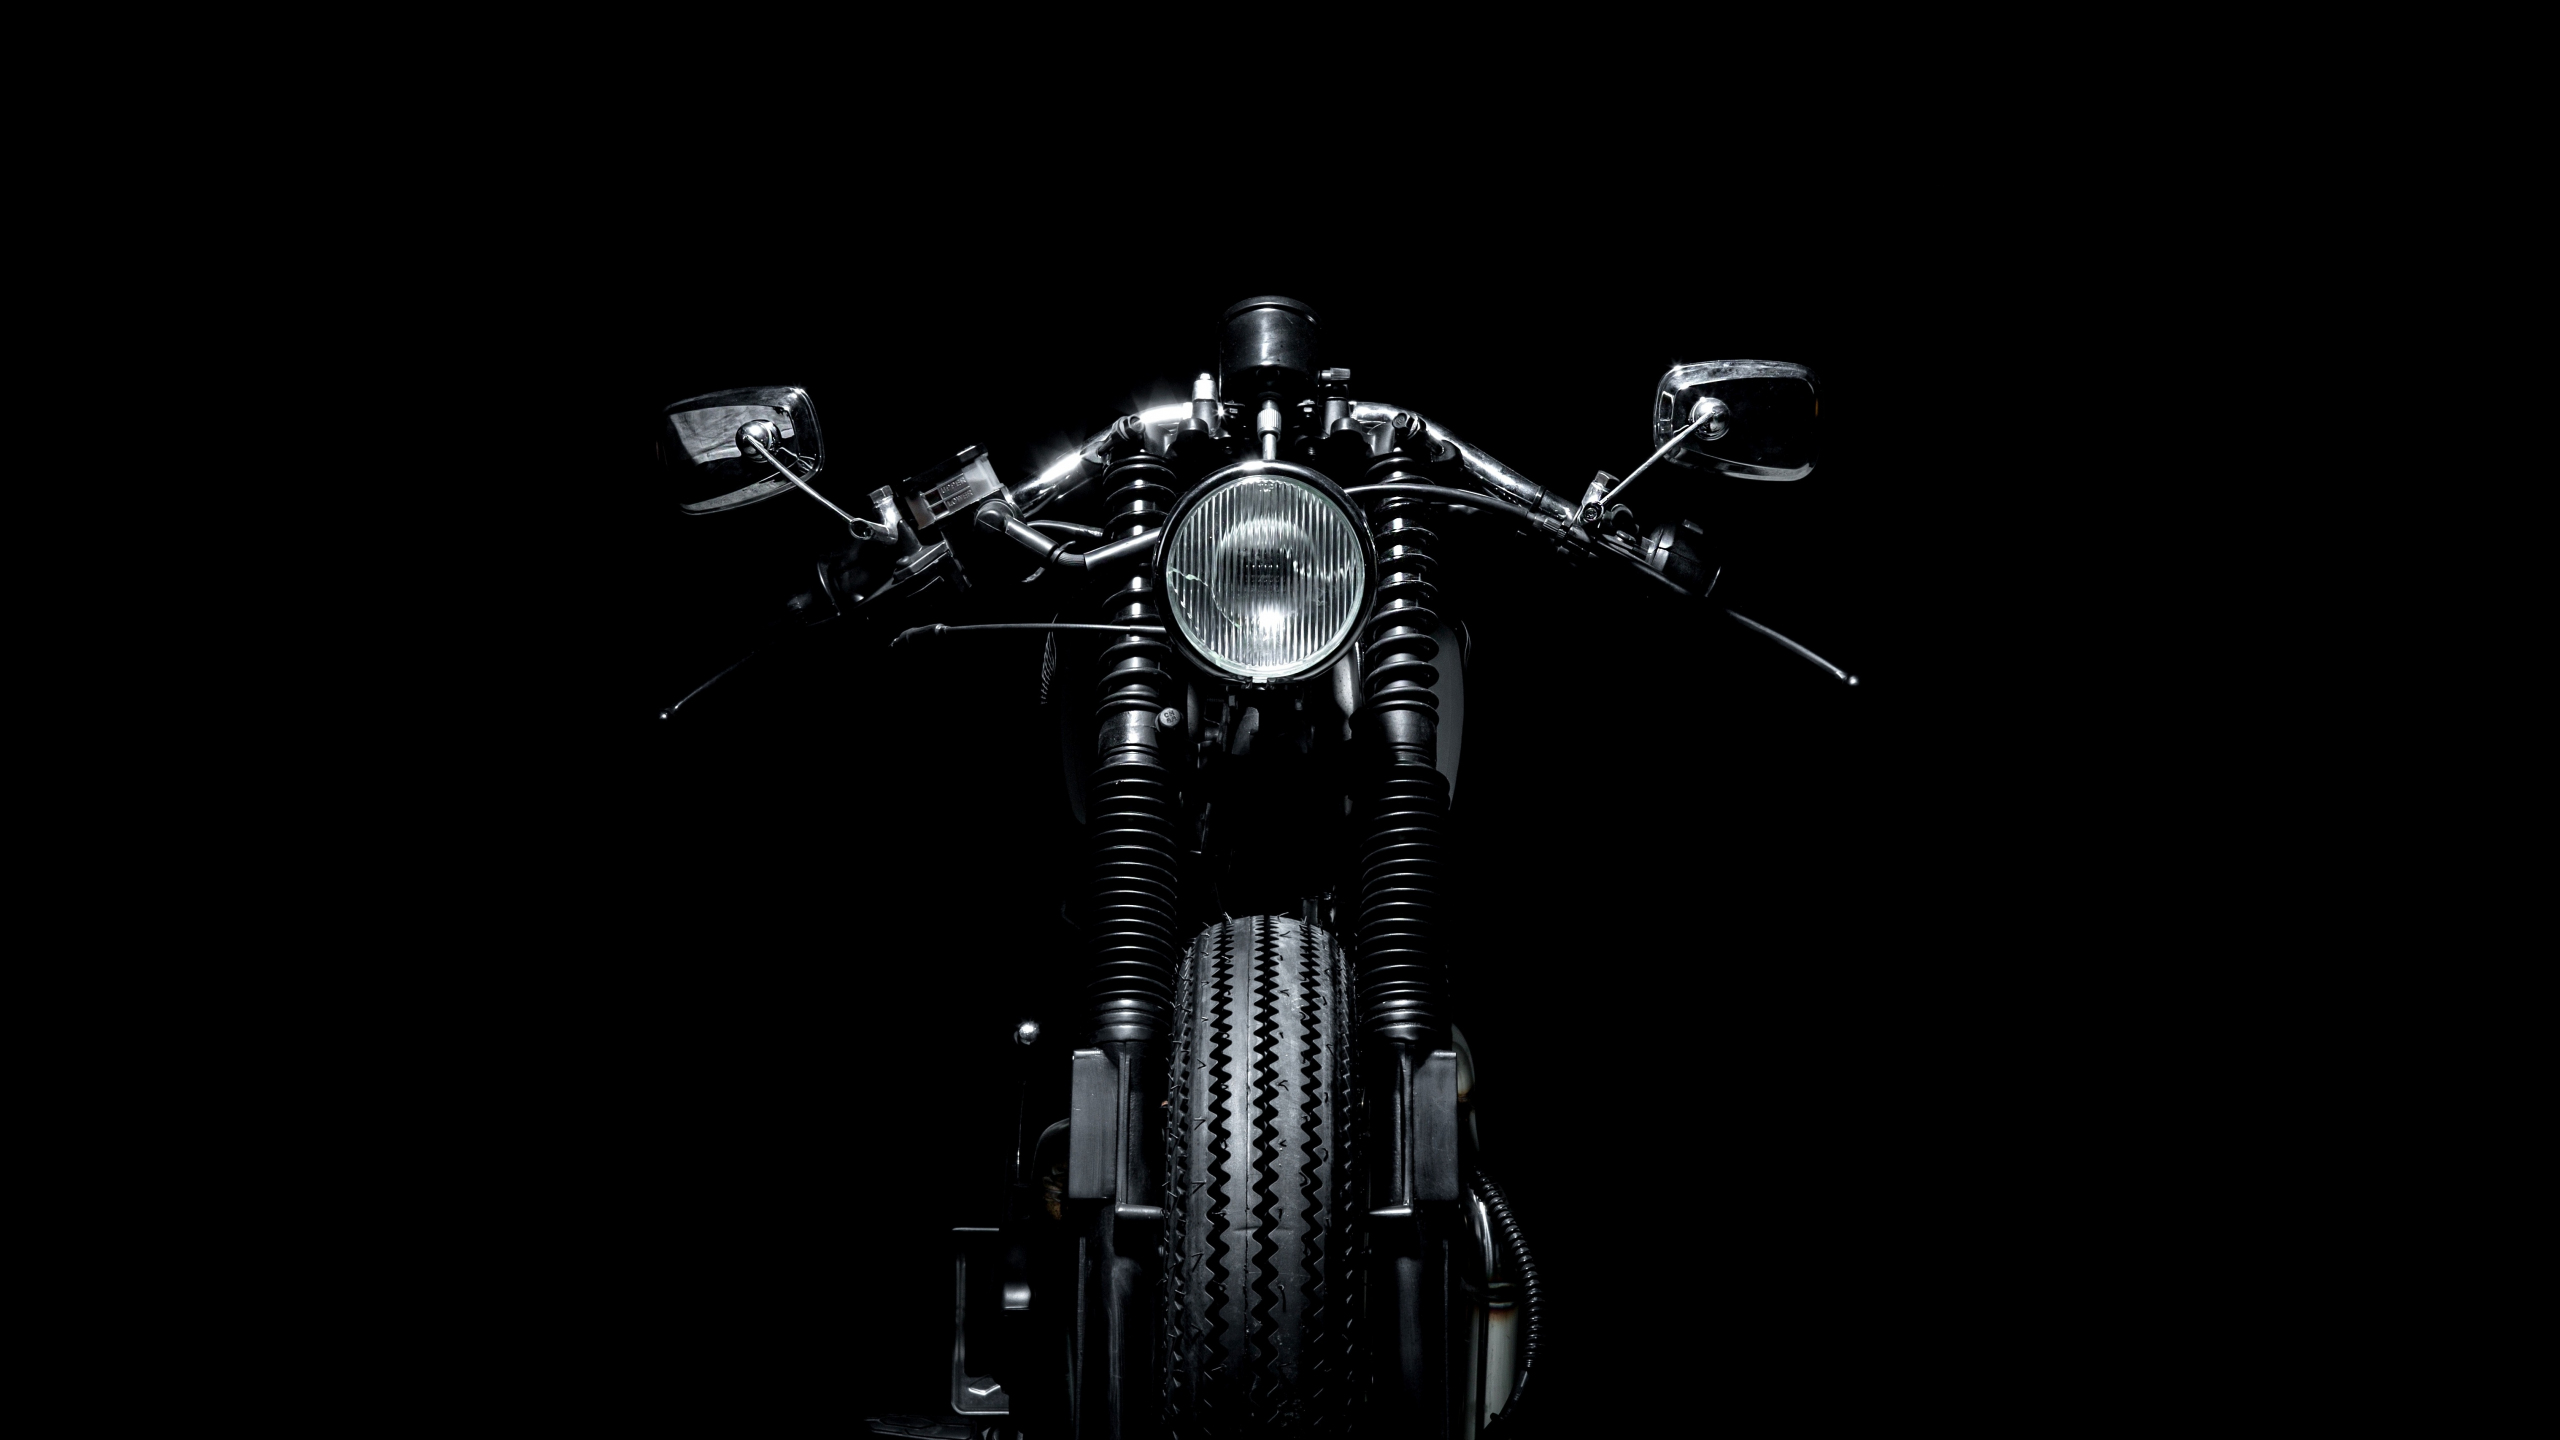 2560X1440 Motorcycle Wallpapers